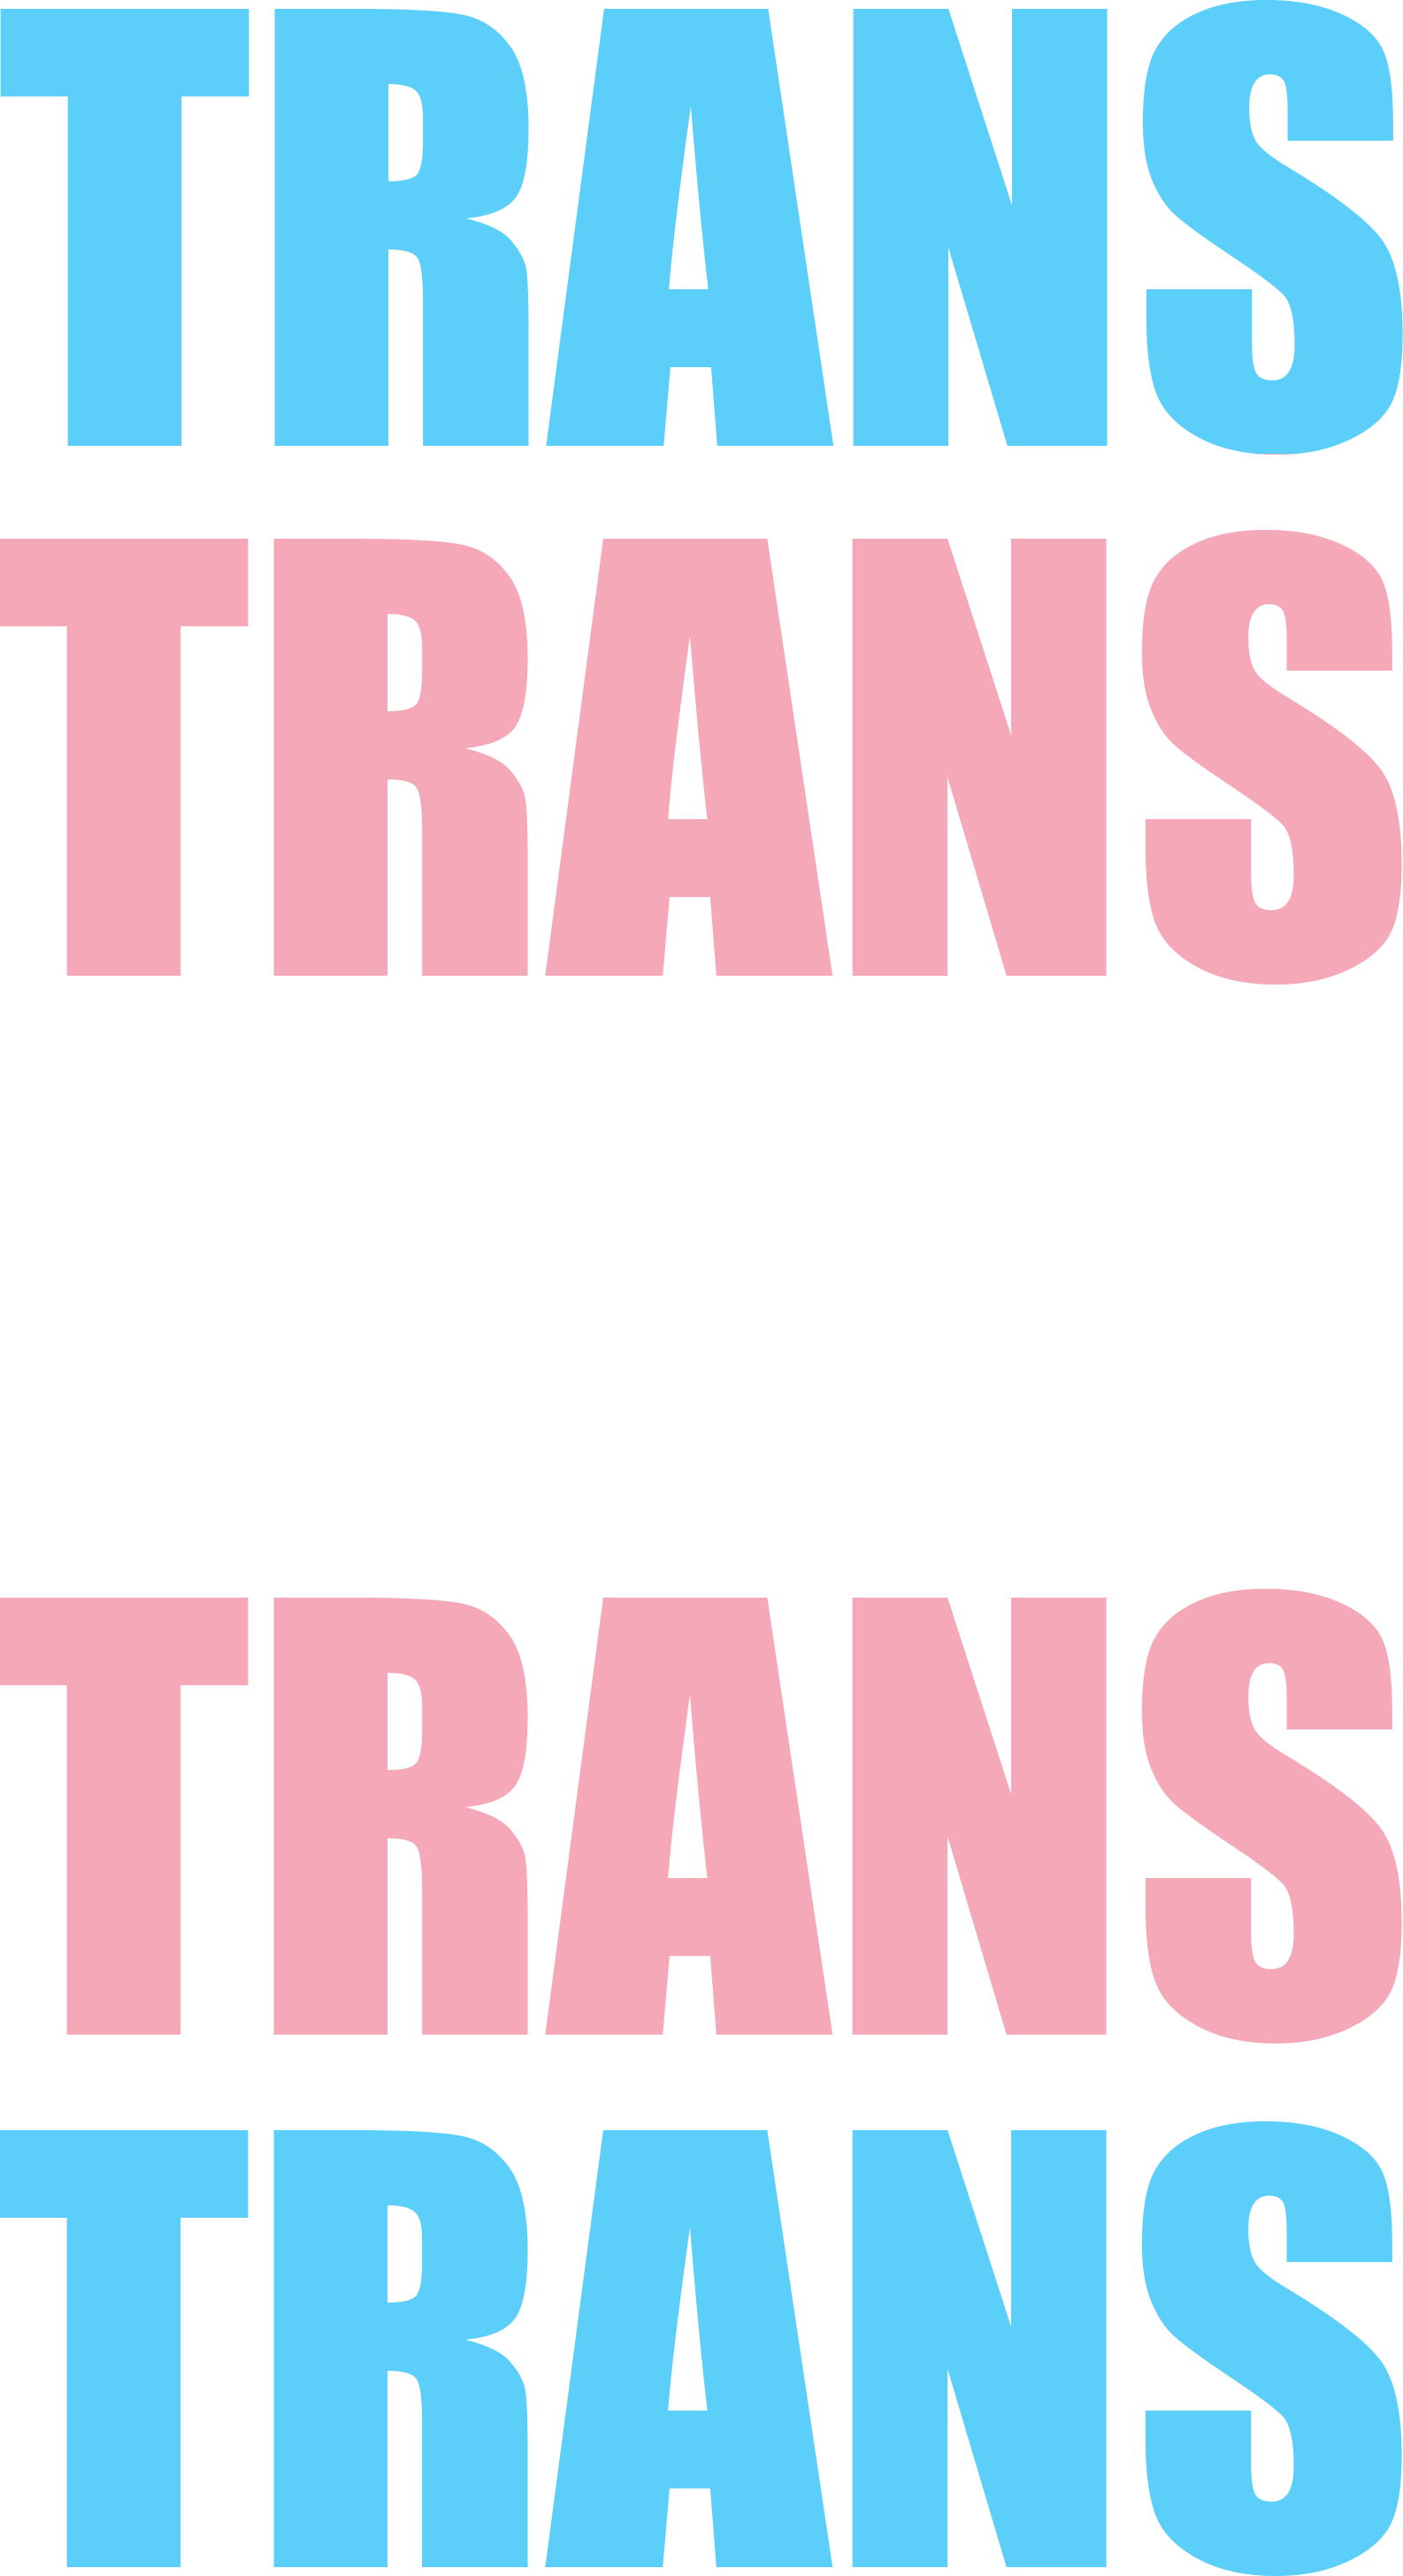 Trans Text by Pride-Flags on DeviantArt